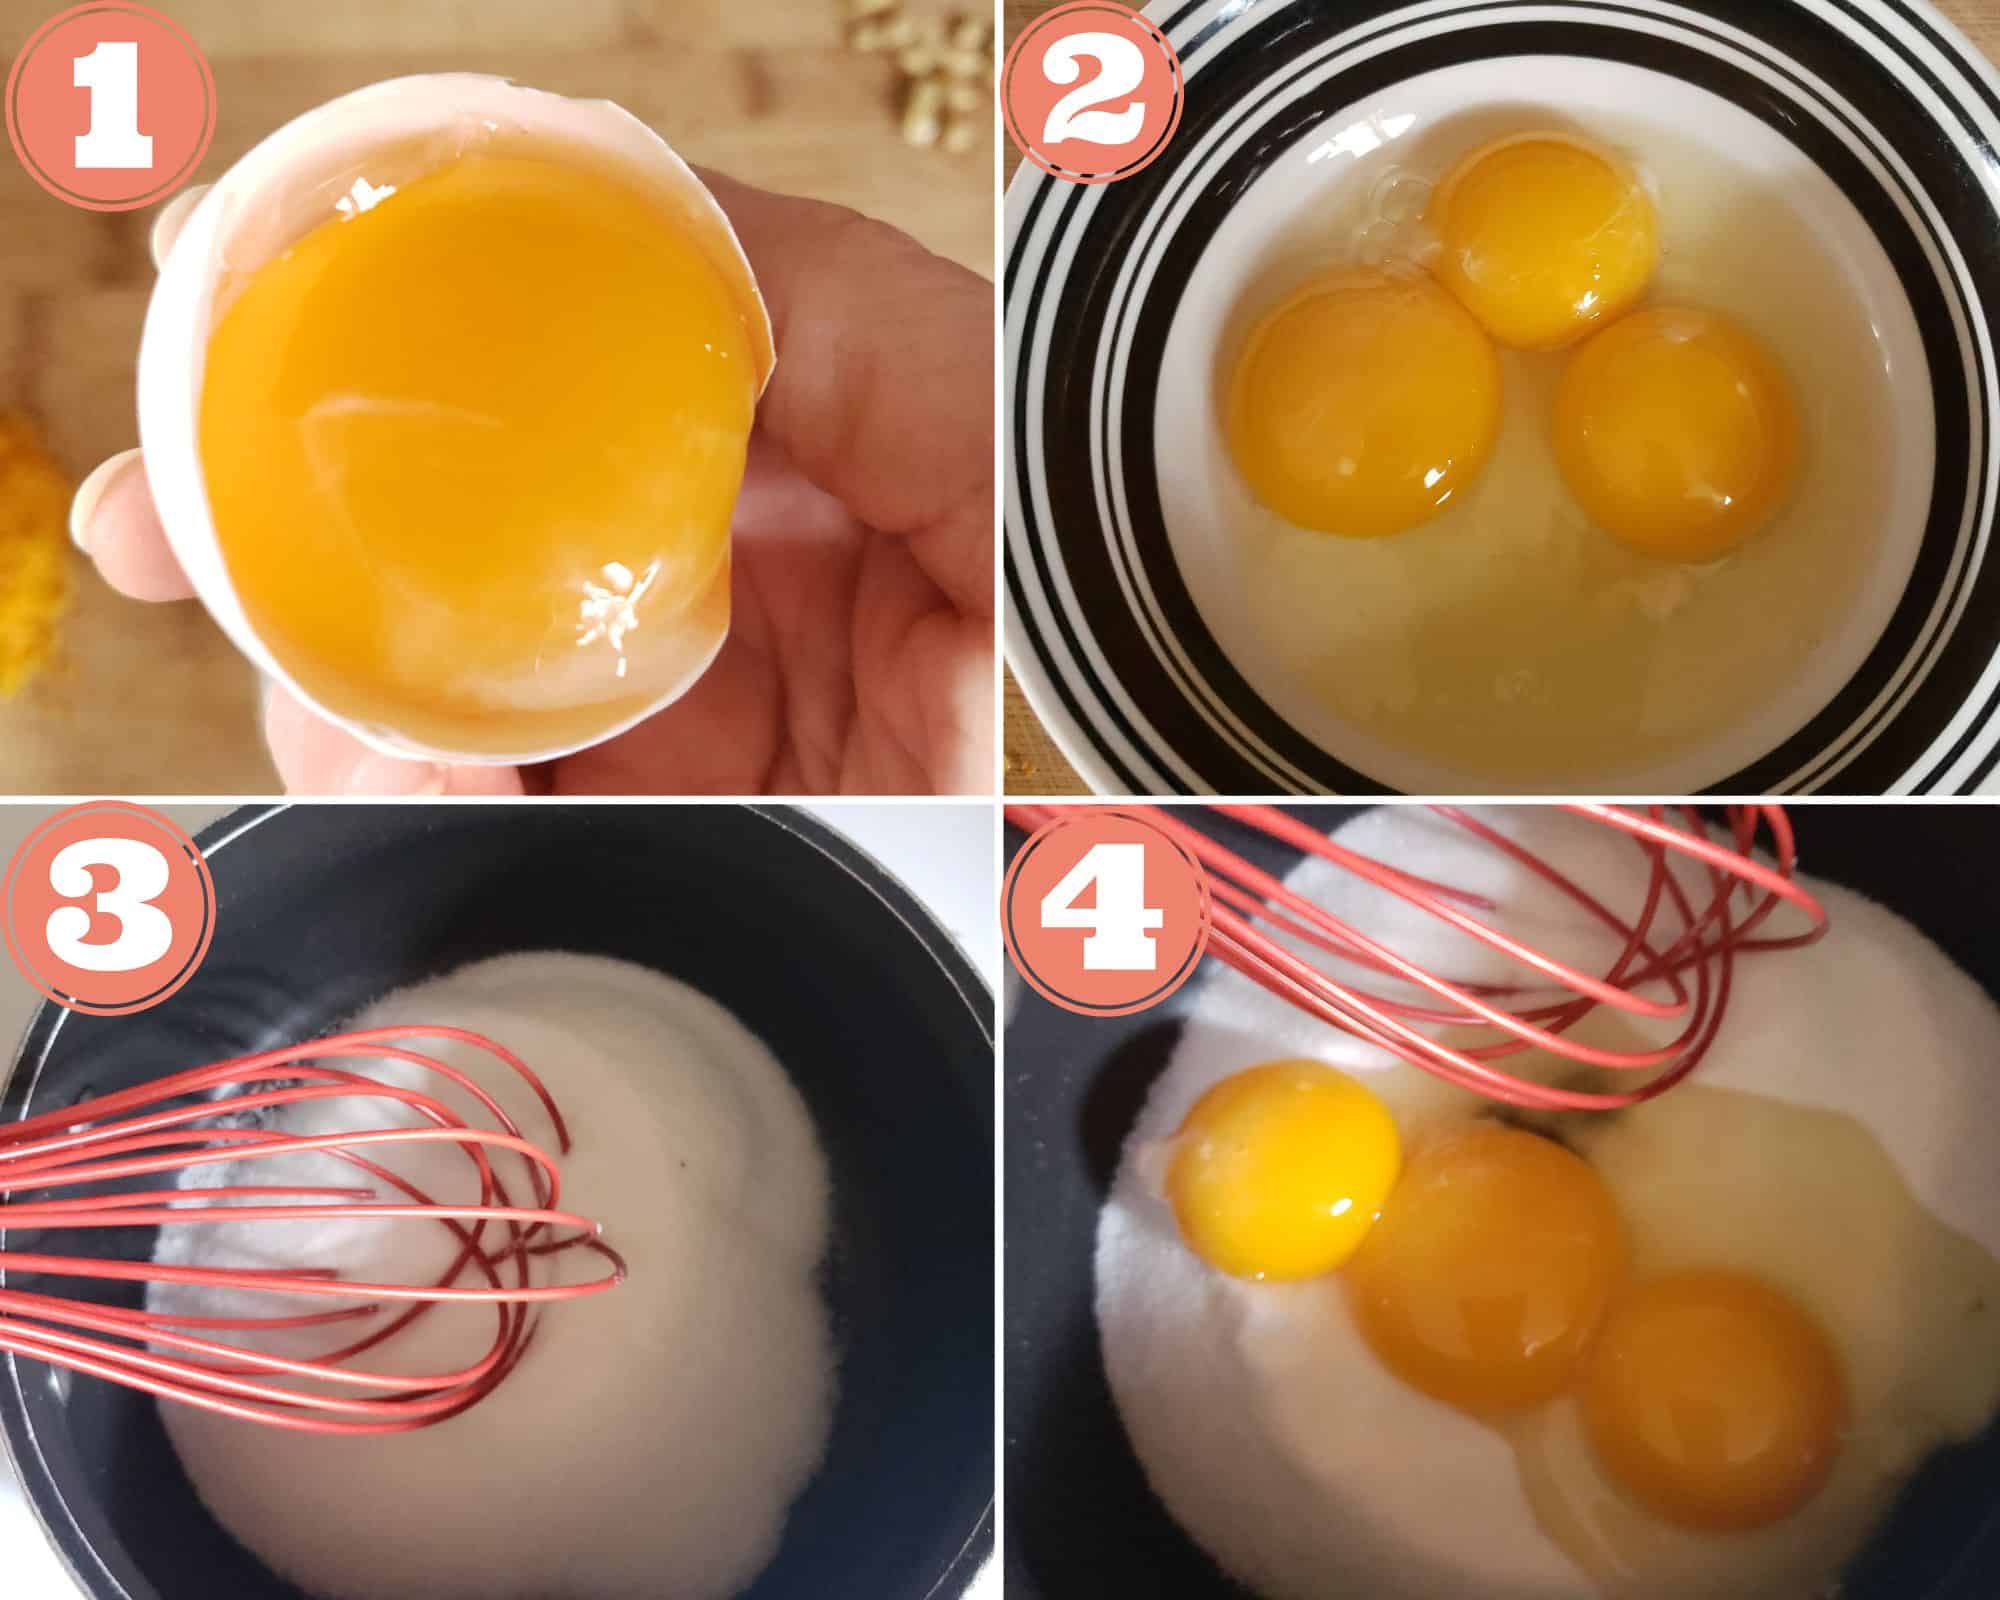 Photos showing how to separate the eggs, and adding the sugar and eggs to the saucepan.